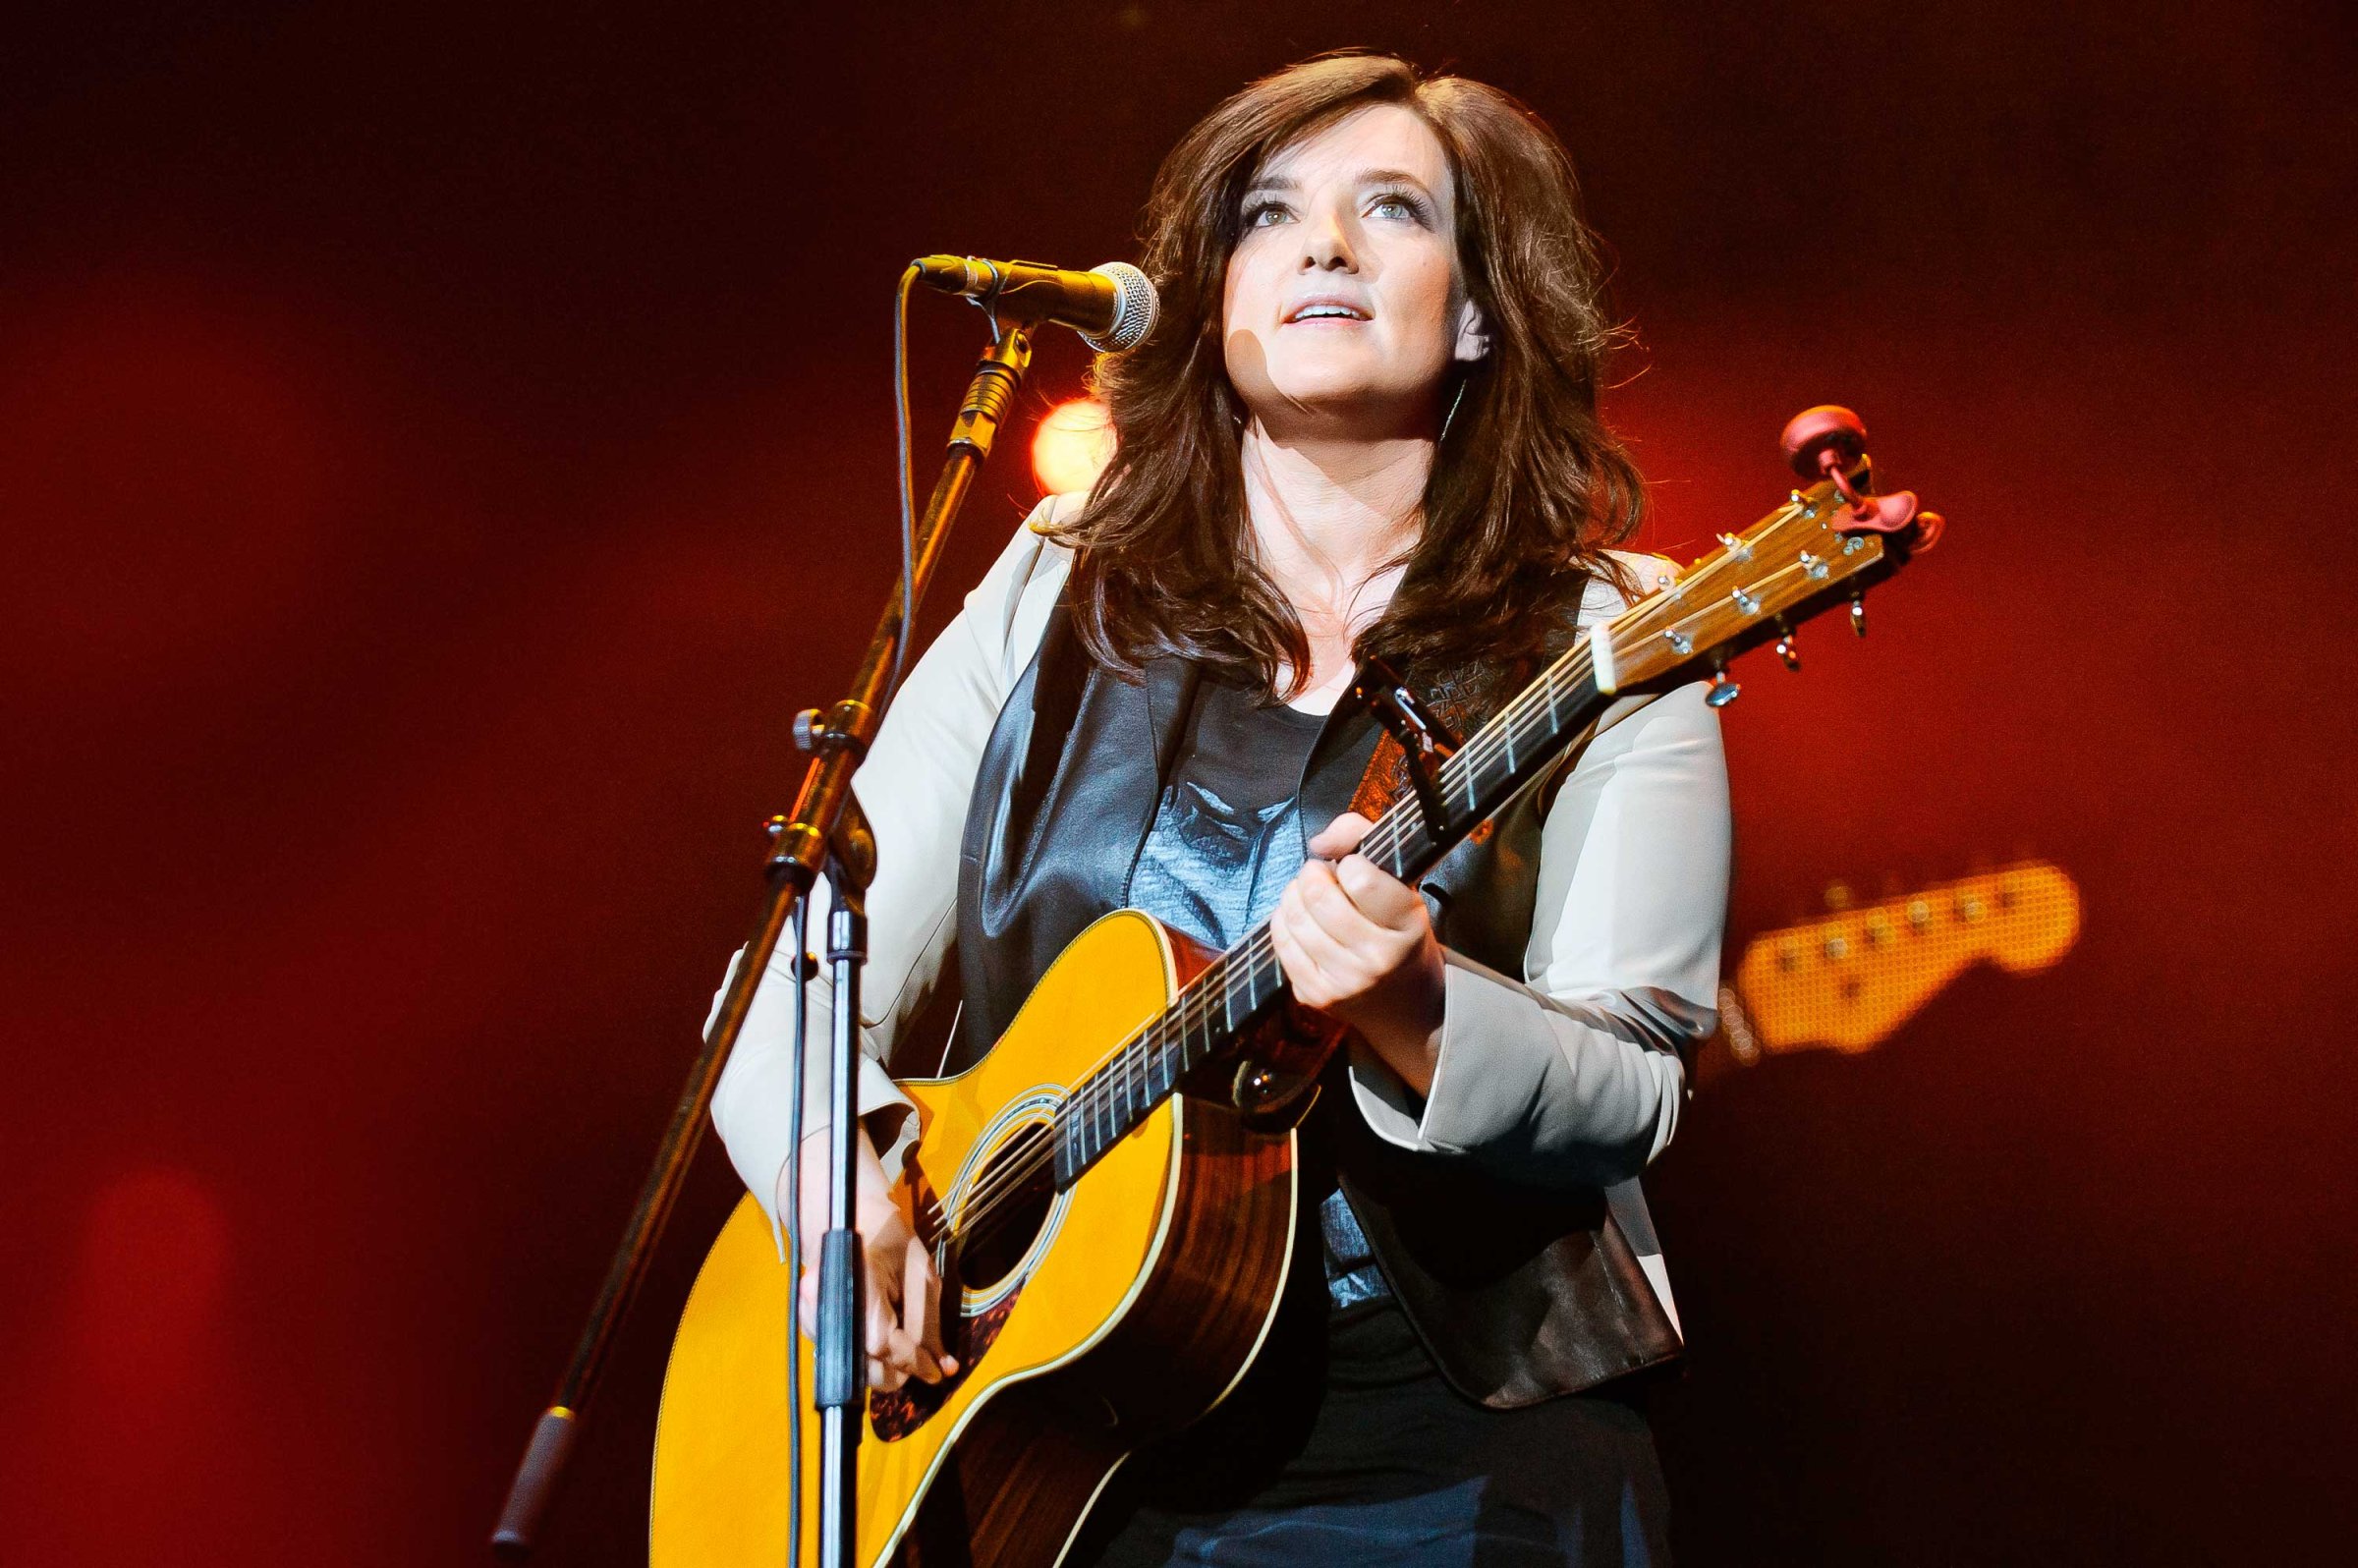 brandy-clark-small-town-musician-country-singer